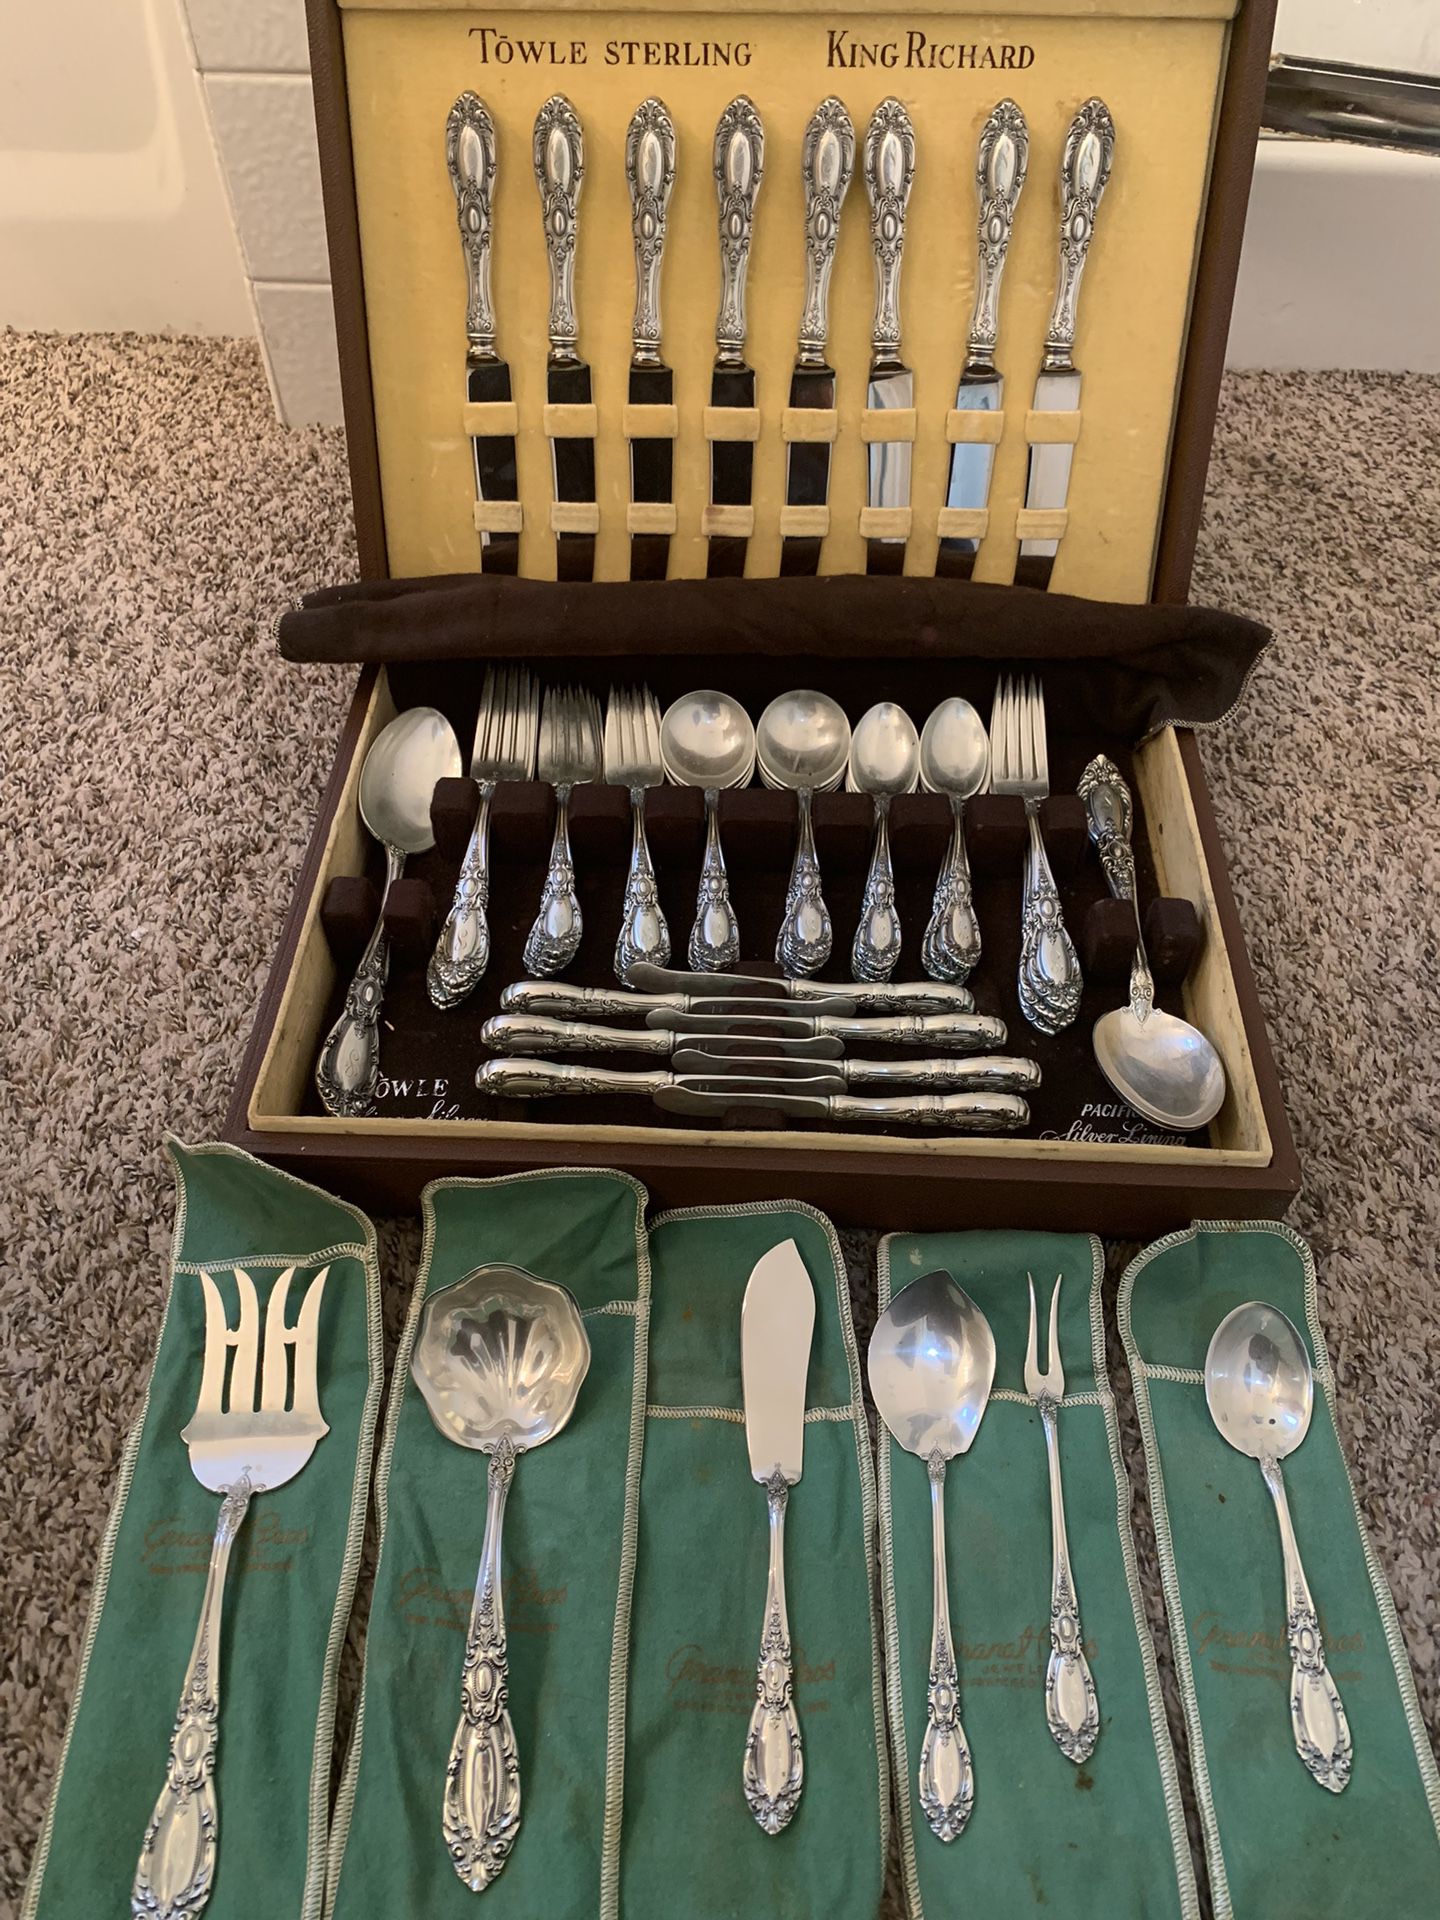 TOWLE STERLING KING RICHARD 56 Pc SILVER